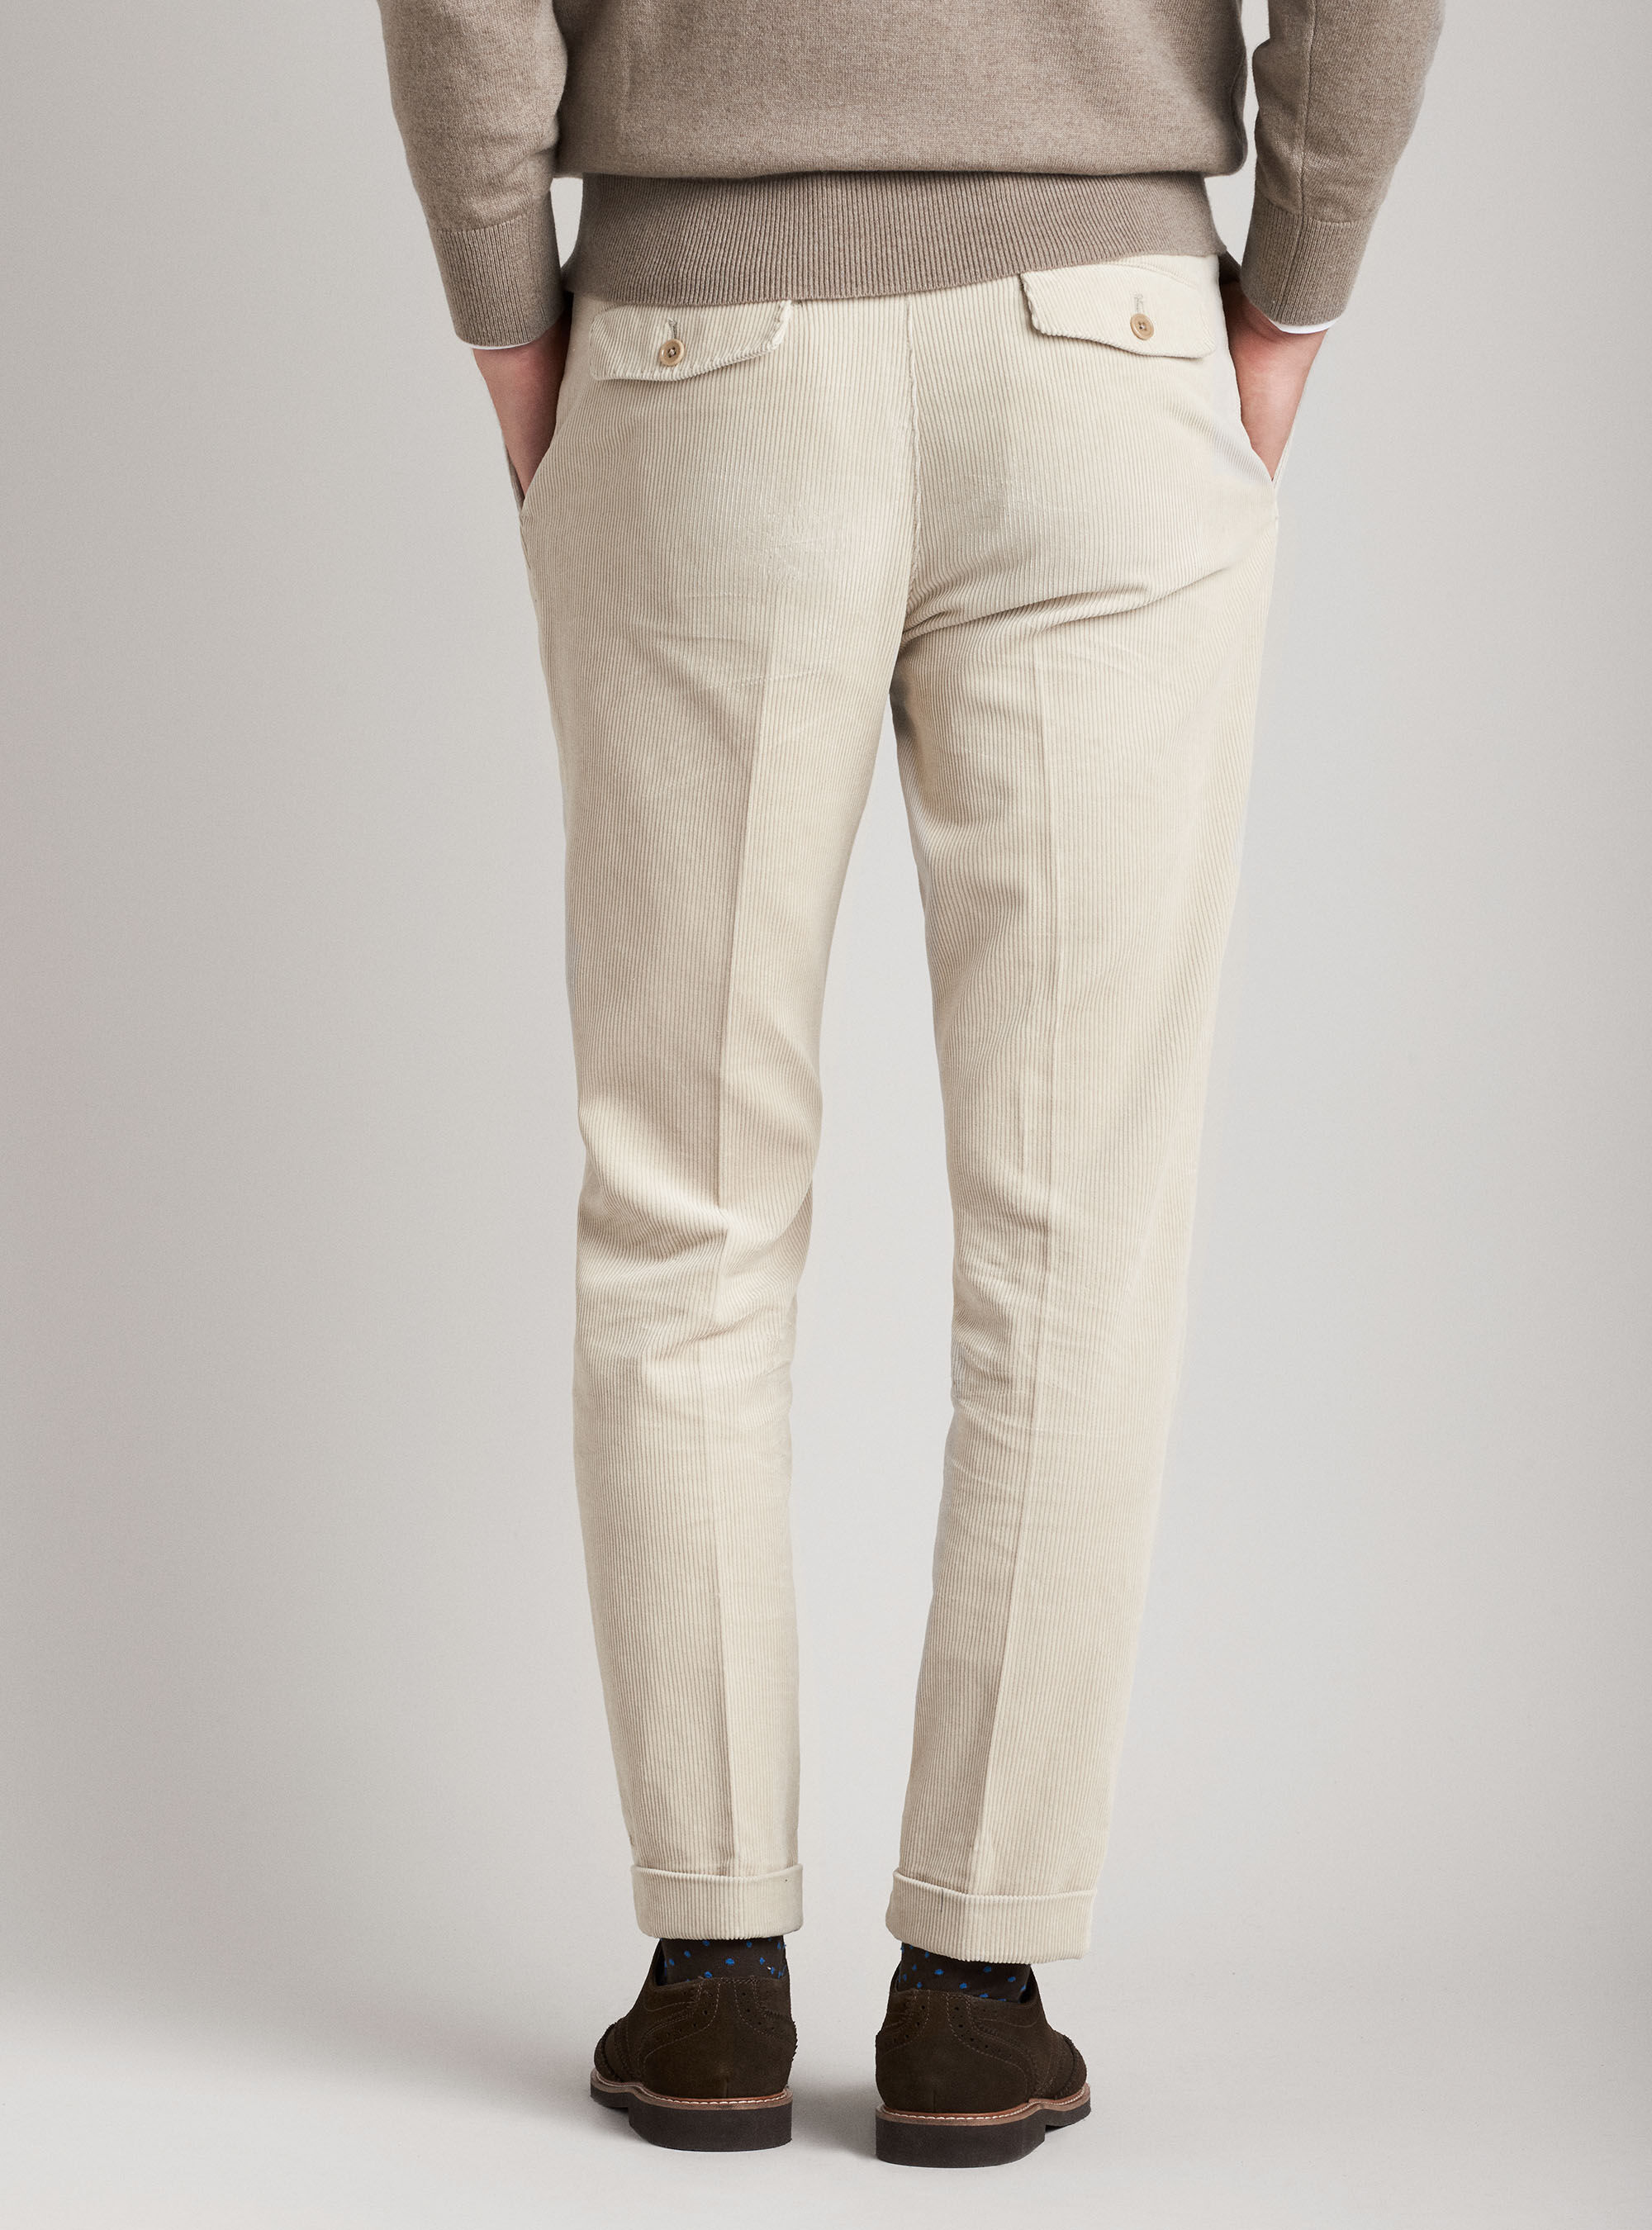 off white chino pants Big sale - OFF 67%